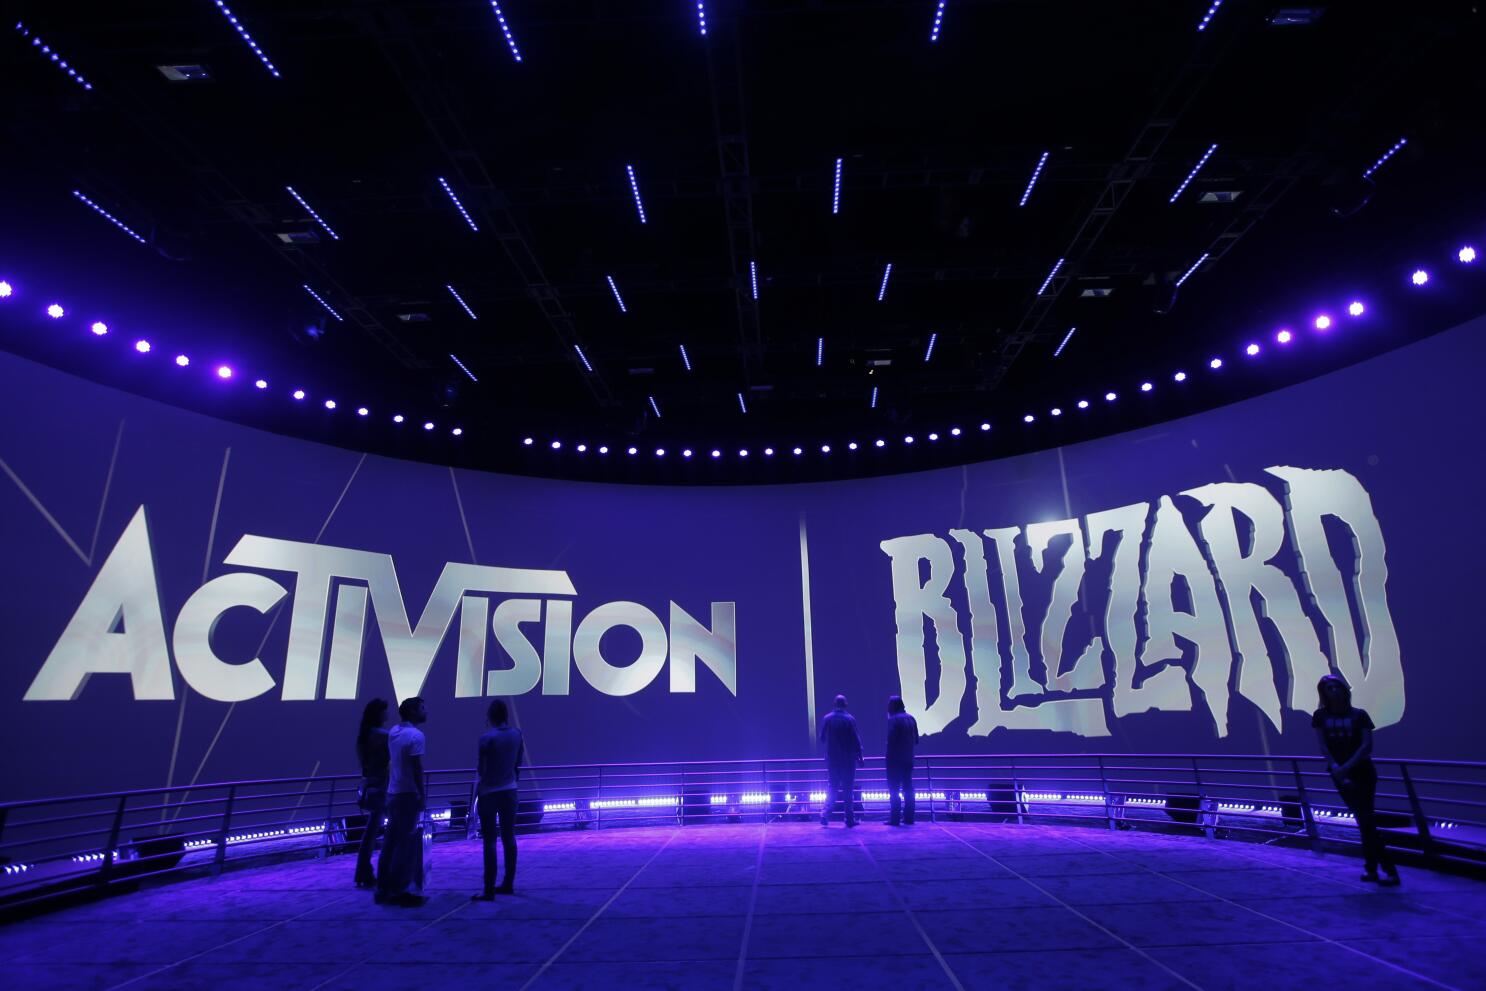 How will Microsoft drop Activision Blizzard games onto Game Pass when the  acquisition closes?